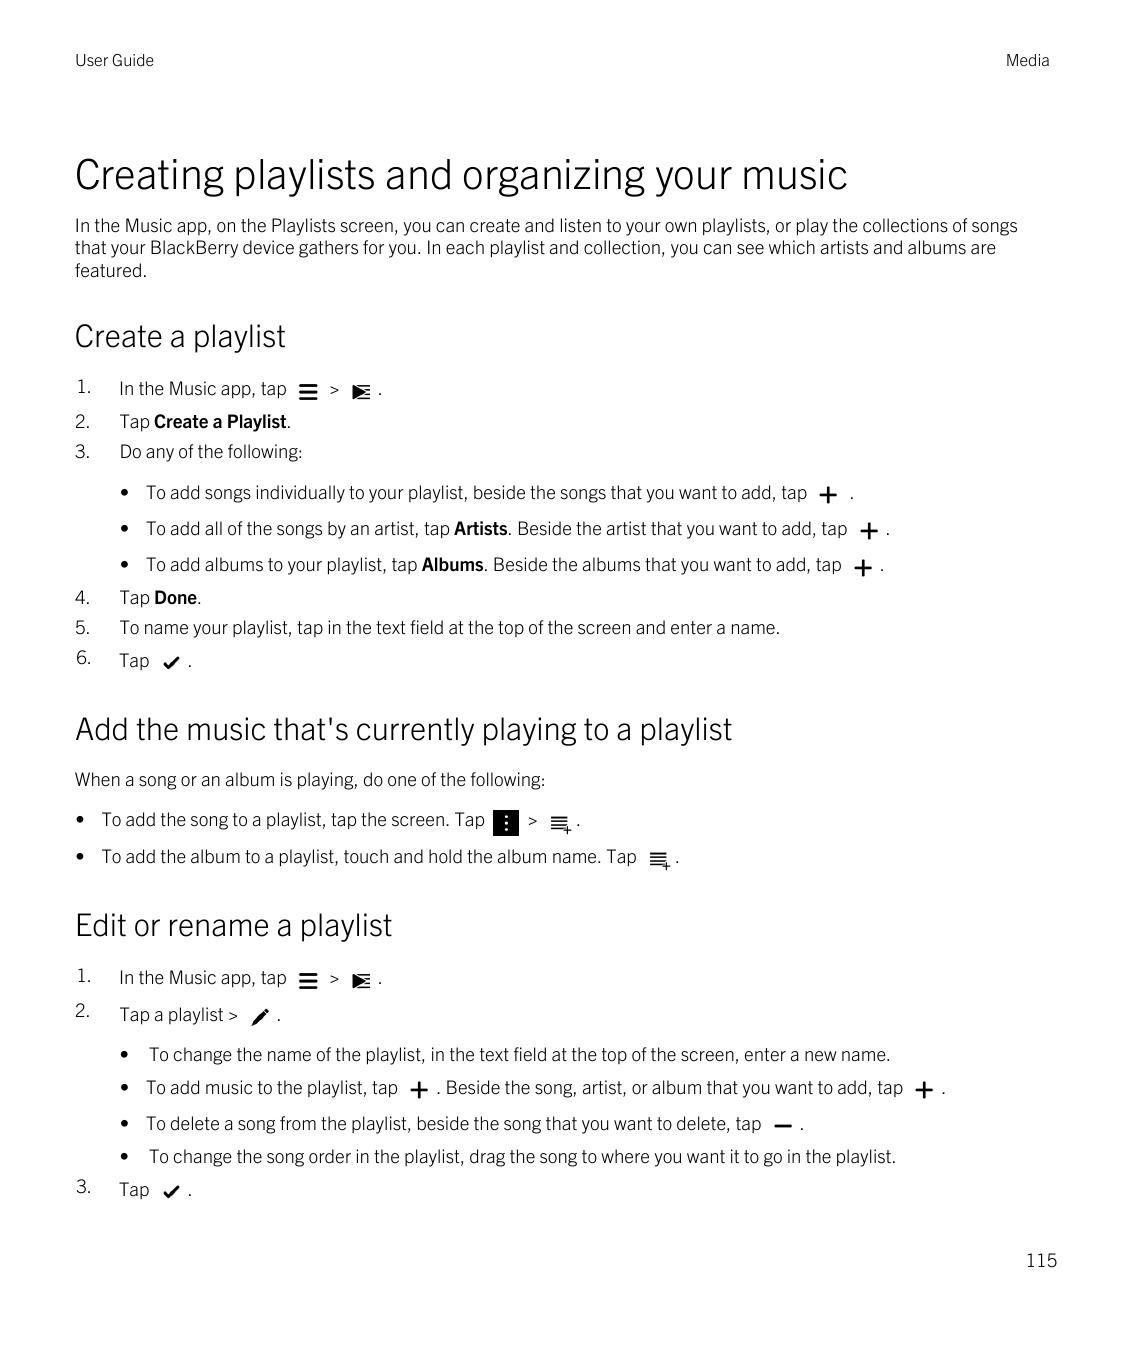 User GuideMediaCreating playlists and organizing your musicIn the Music app, on the Playlists screen, you can create and listen 